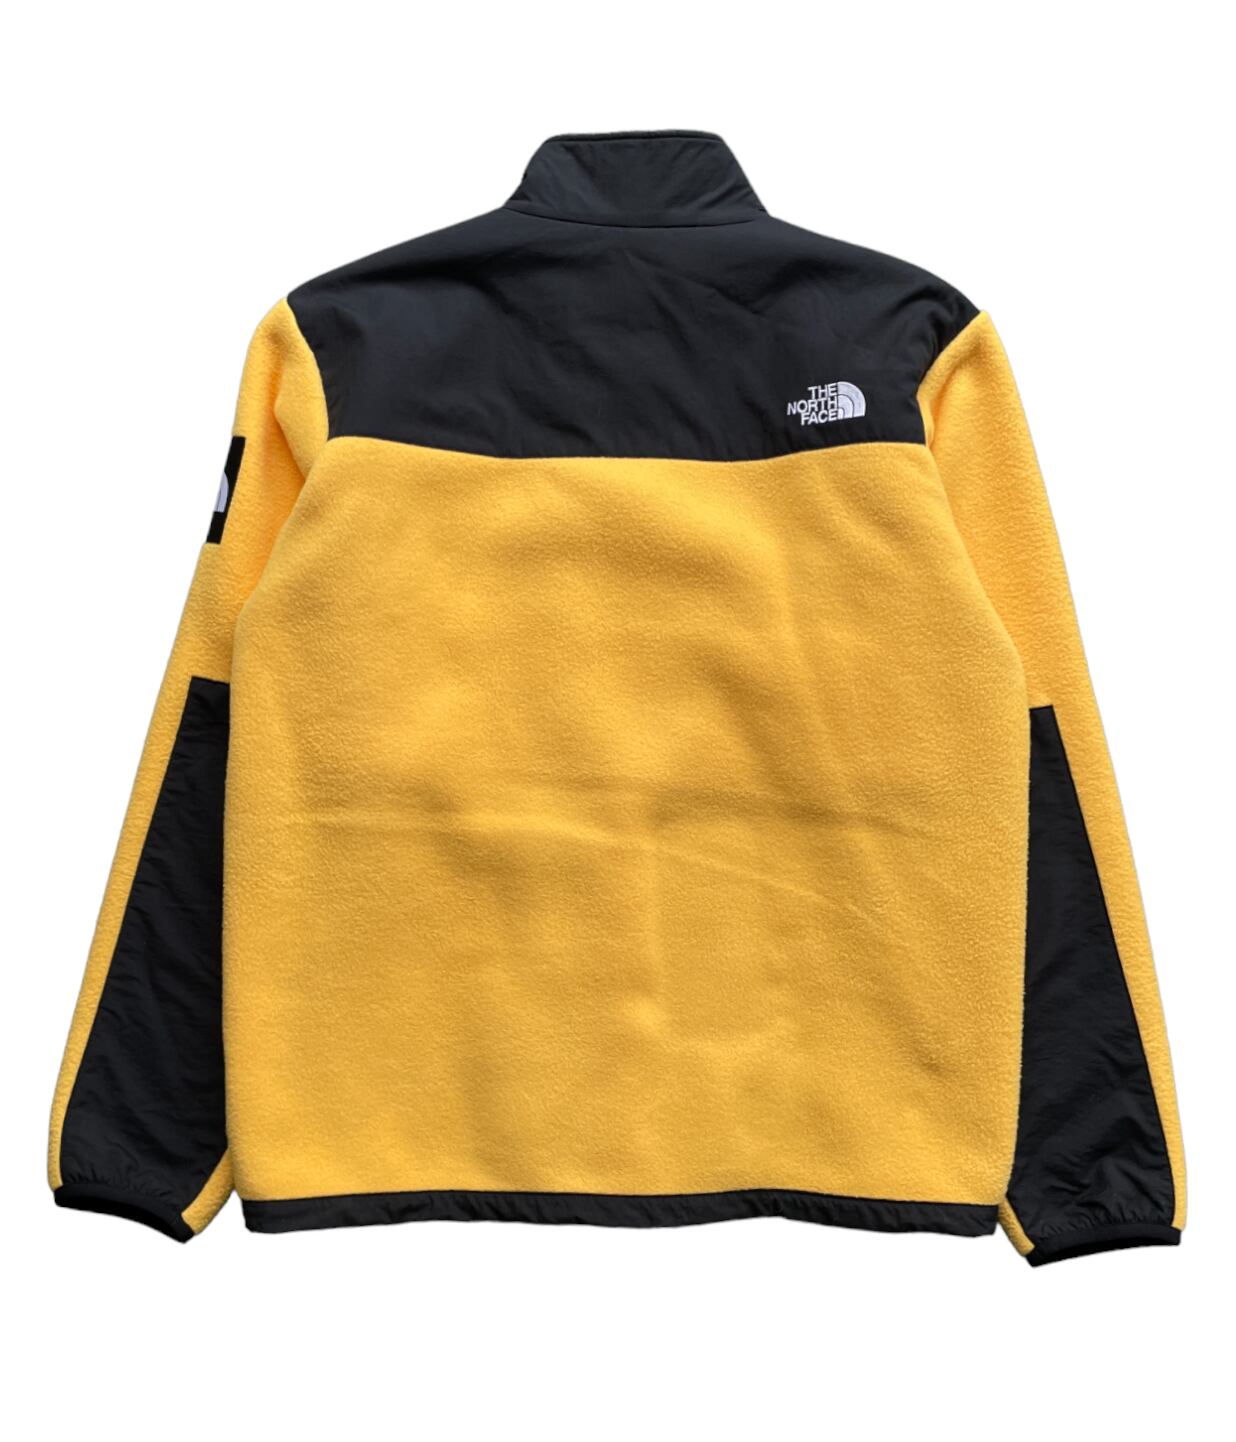 Used L fleece jacket -the north face- | BEGGARS BANQUET公式通販サイト 古着・ヴィンテージ